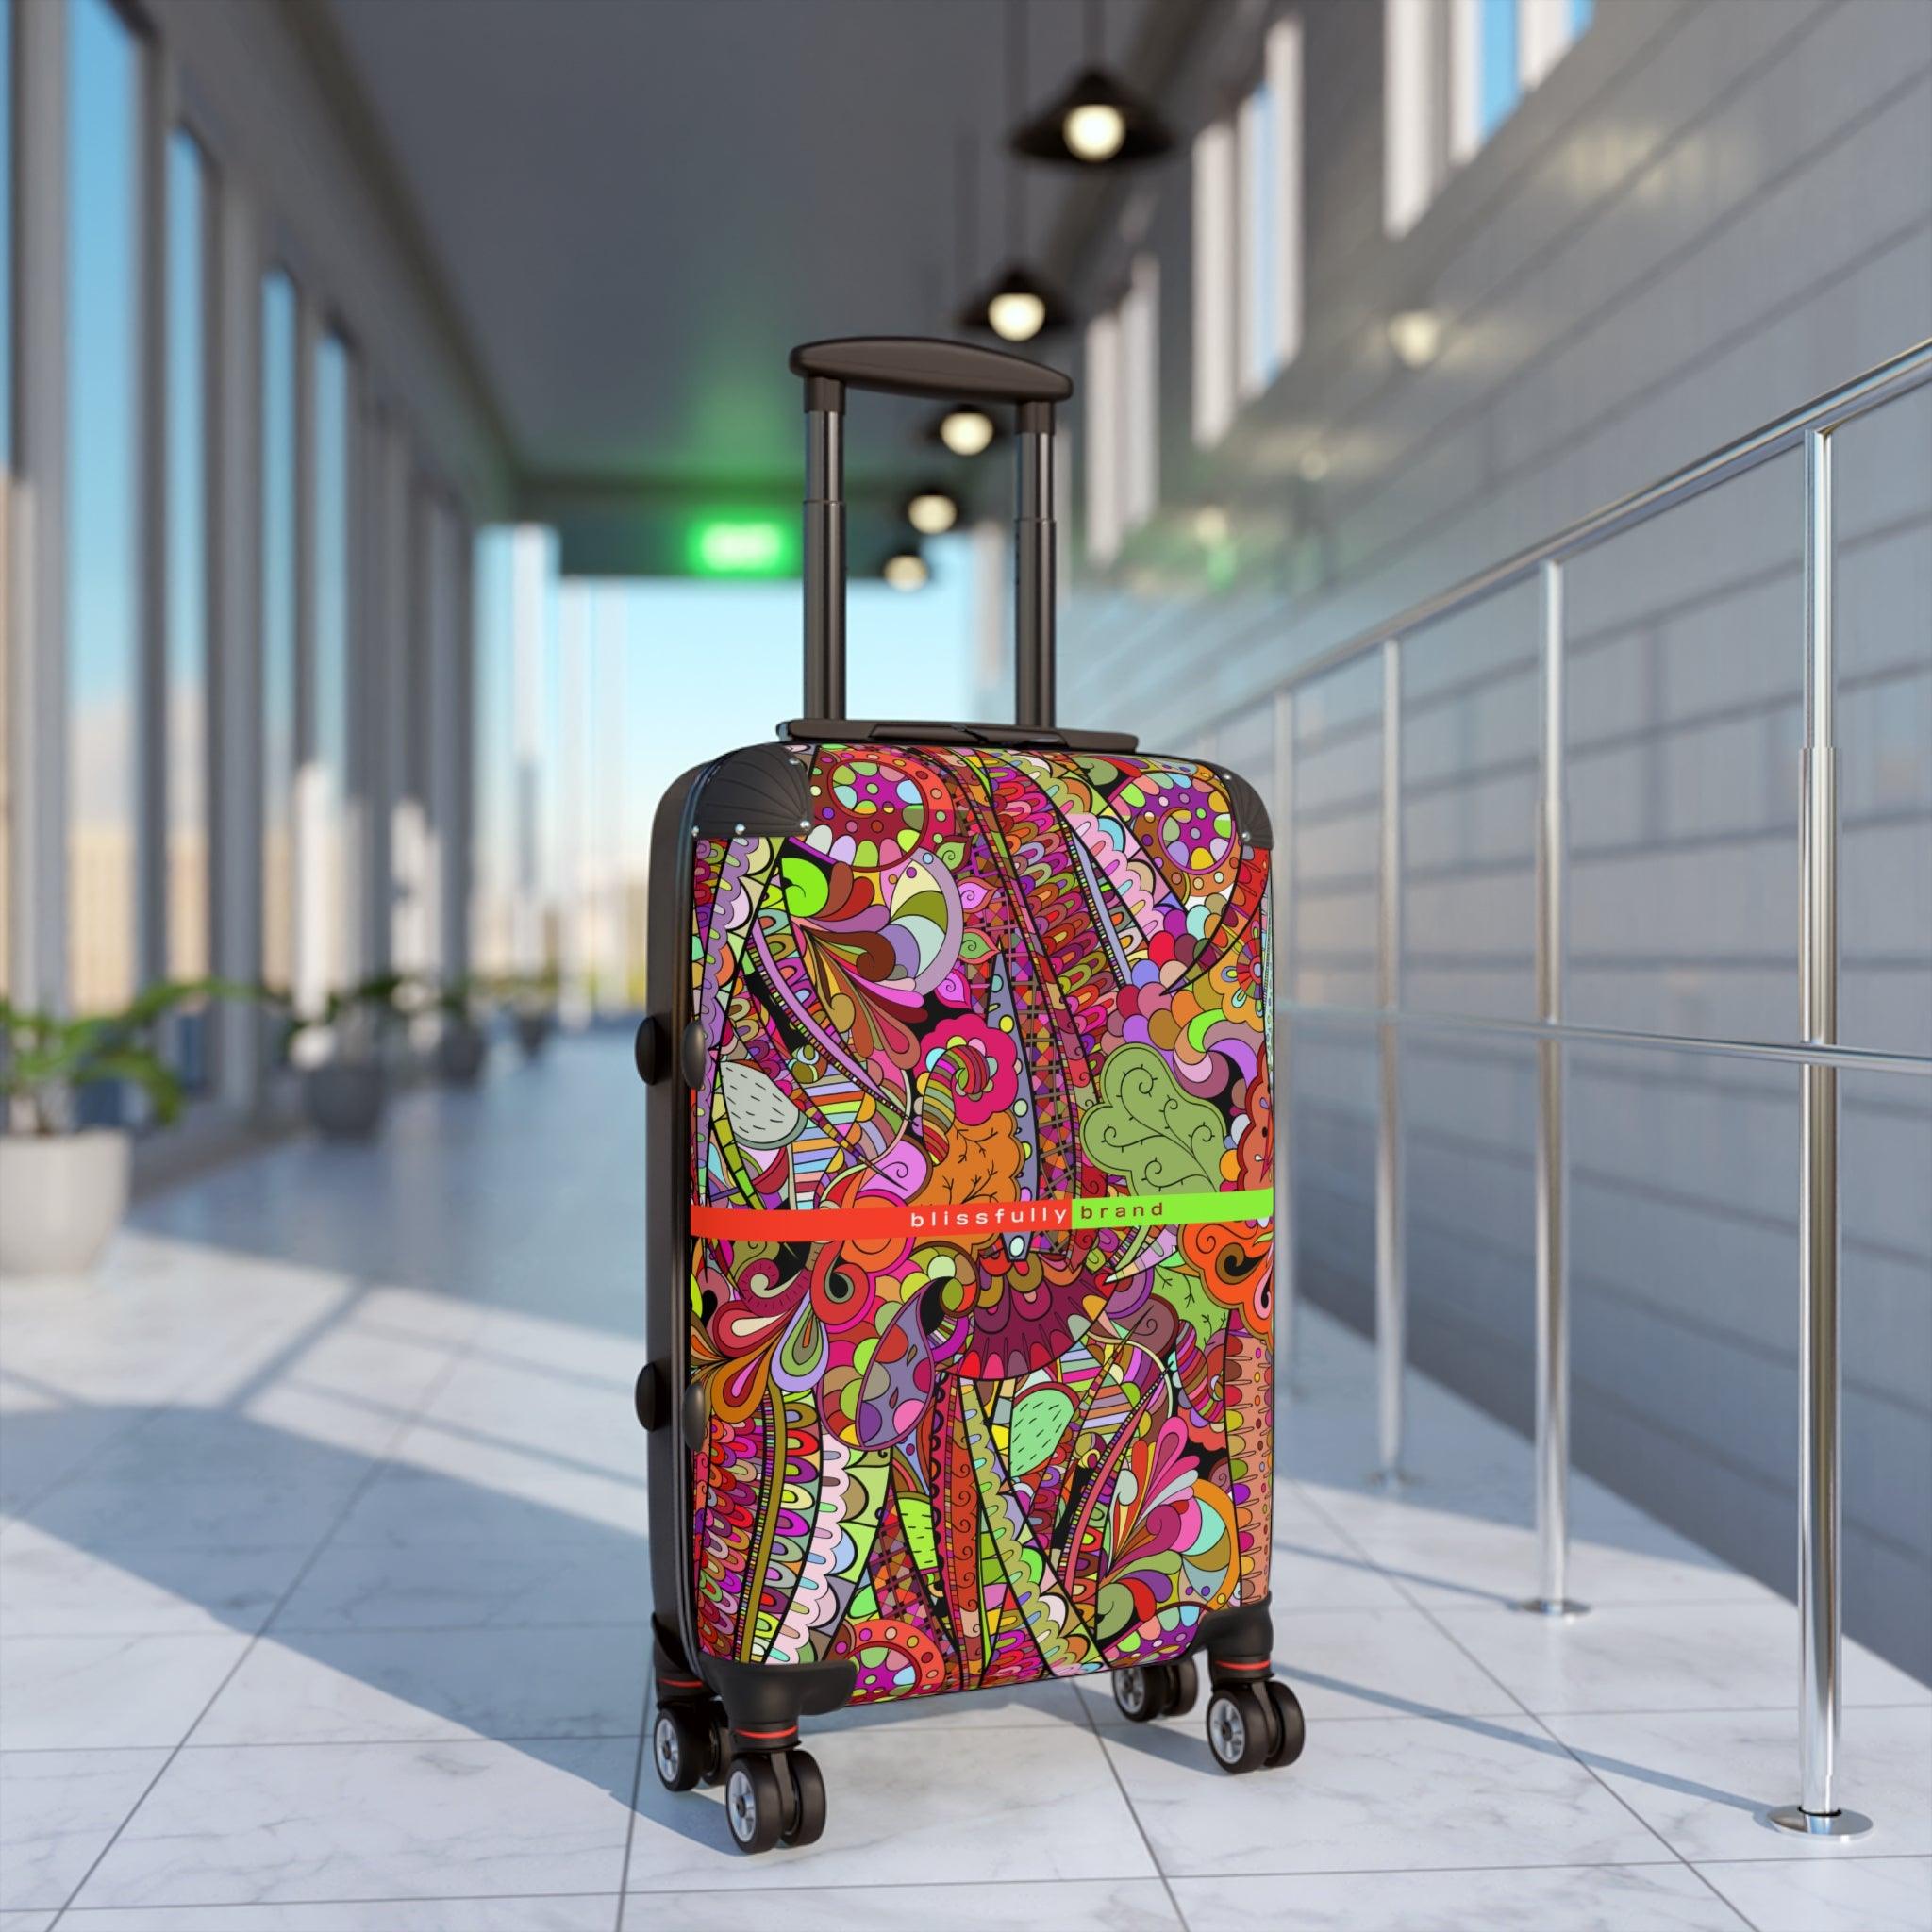 Betsu Luggage Collection - Abstract Kaleidoscope Paisley Floral Print Psychedelic Retro Swirls Funky Multicolor Check in Carry On Roller 360 Hard Shell Unique Retro Vibrant Bold